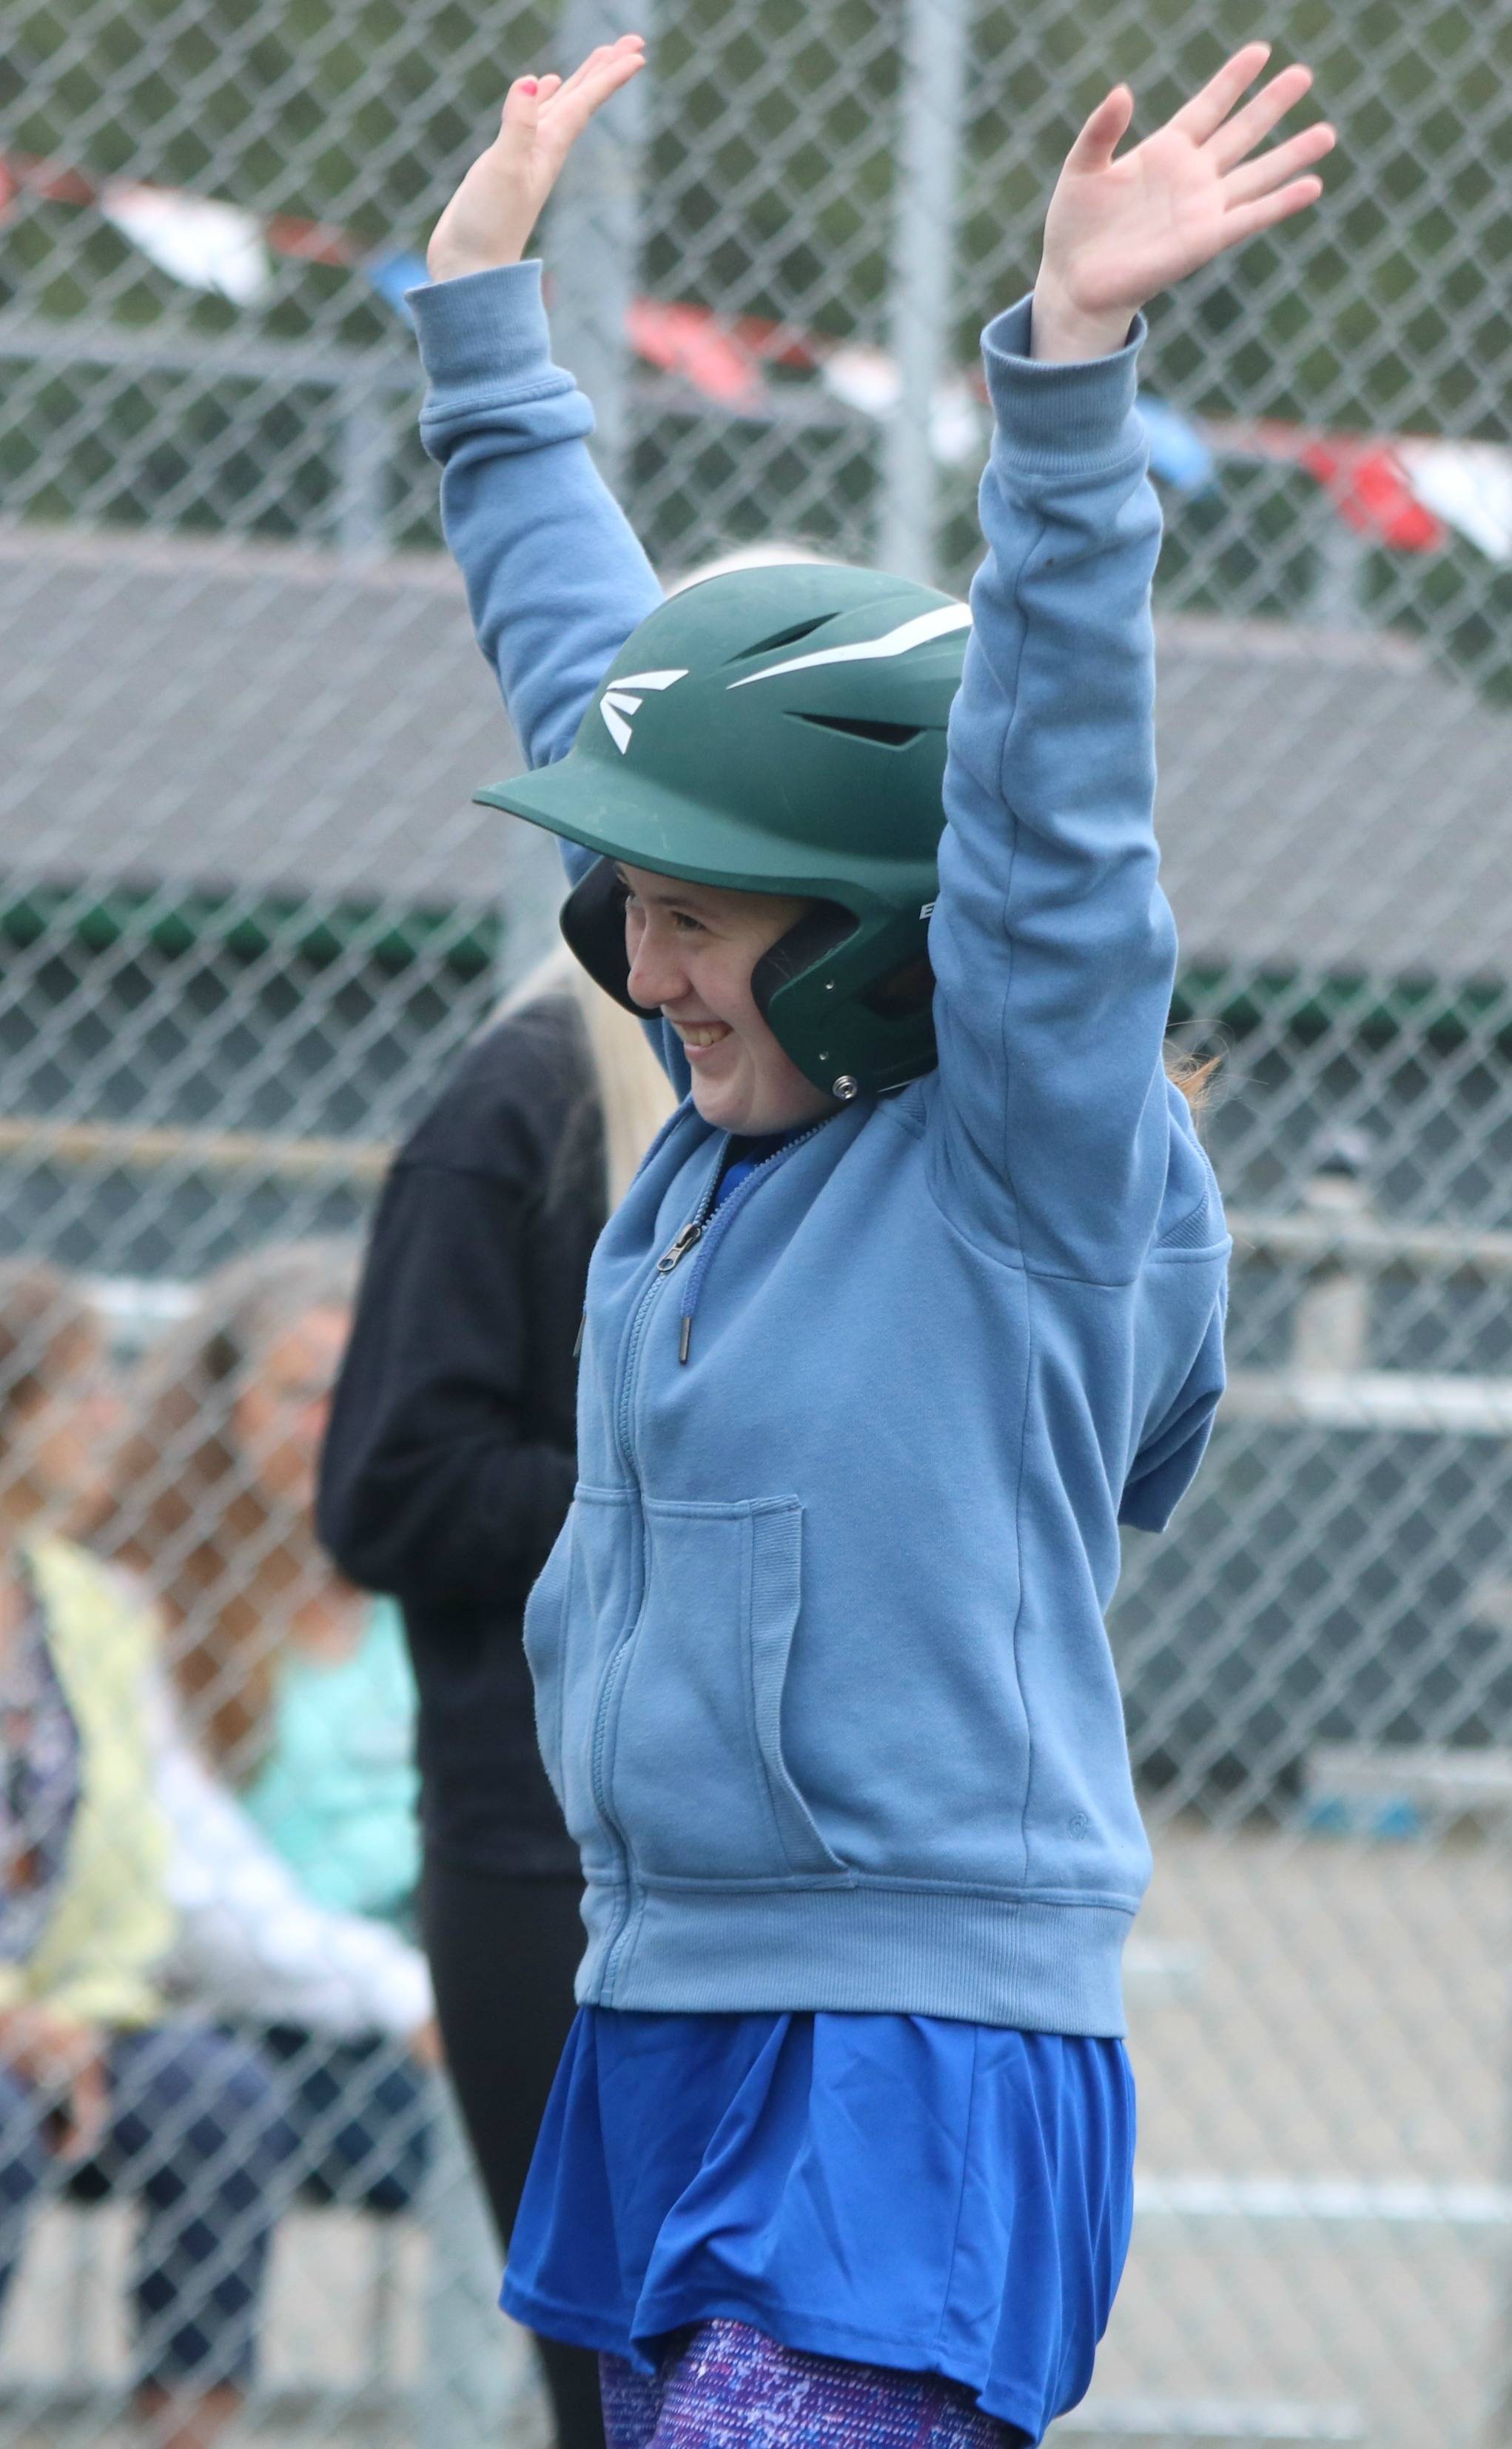 April Snow celebrates scoring after running the bases with team Snoqualmie parent Brandon Duffy. Andy Nystrom / staff photo